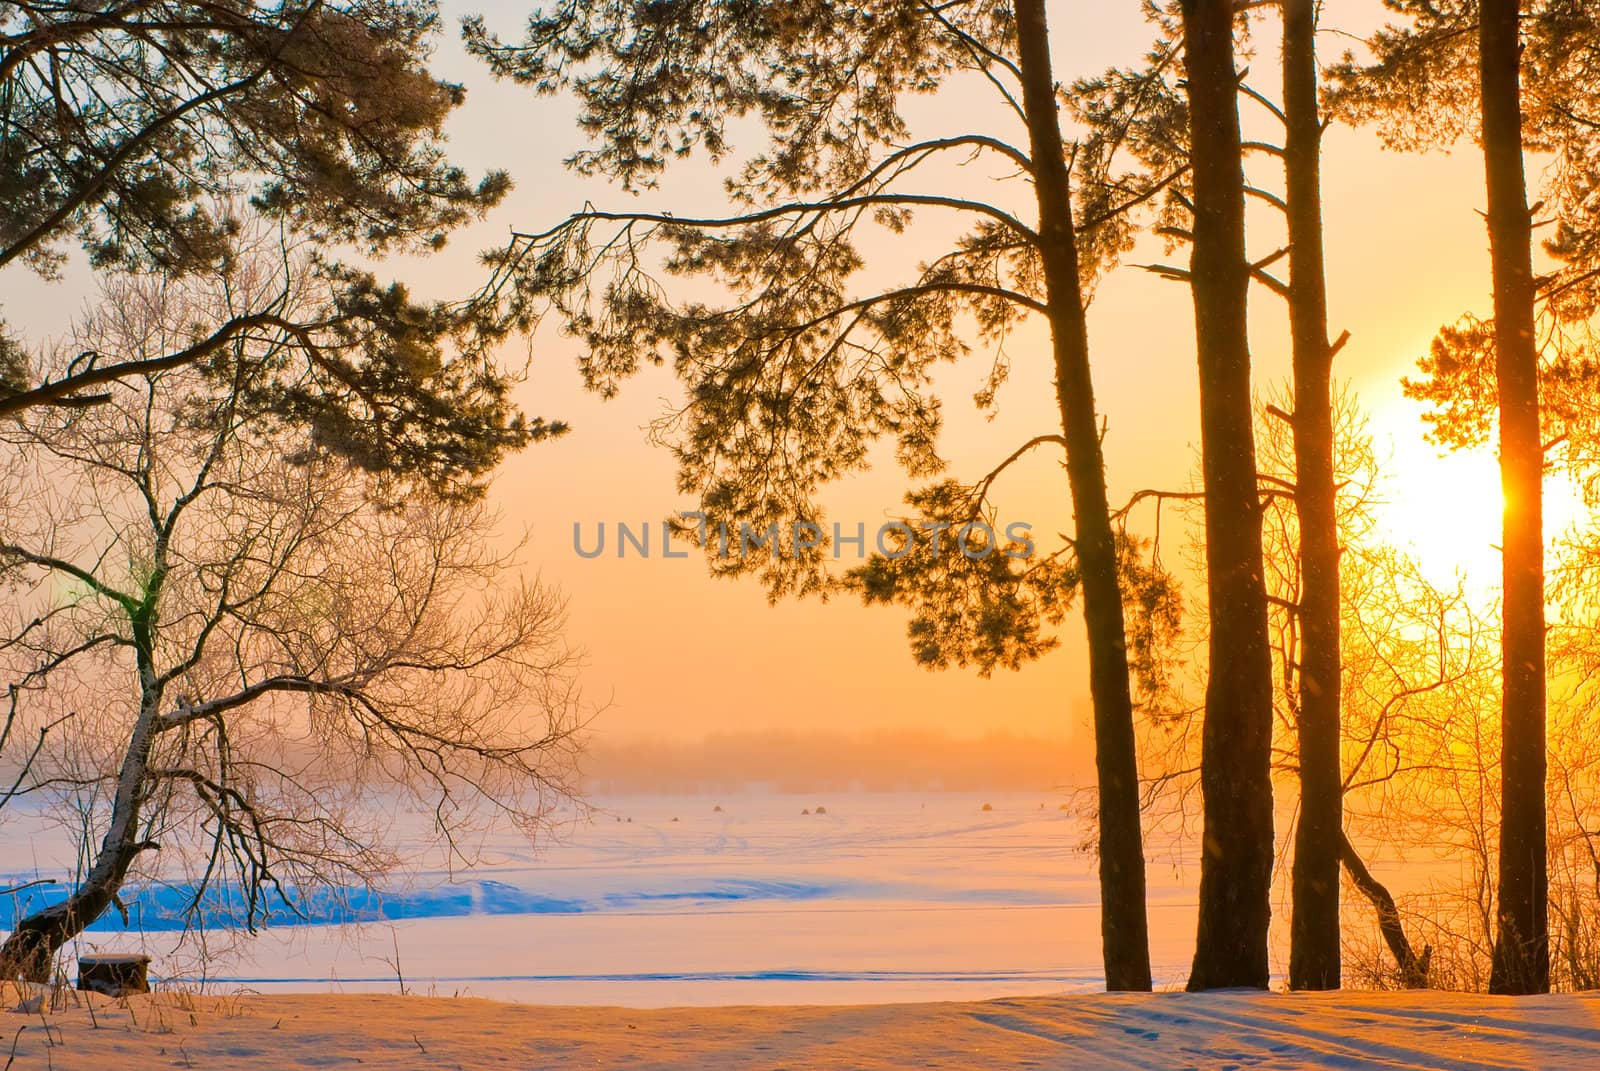 The trunks of the pines on the shore of a frozen lake in the rays of the rising sun